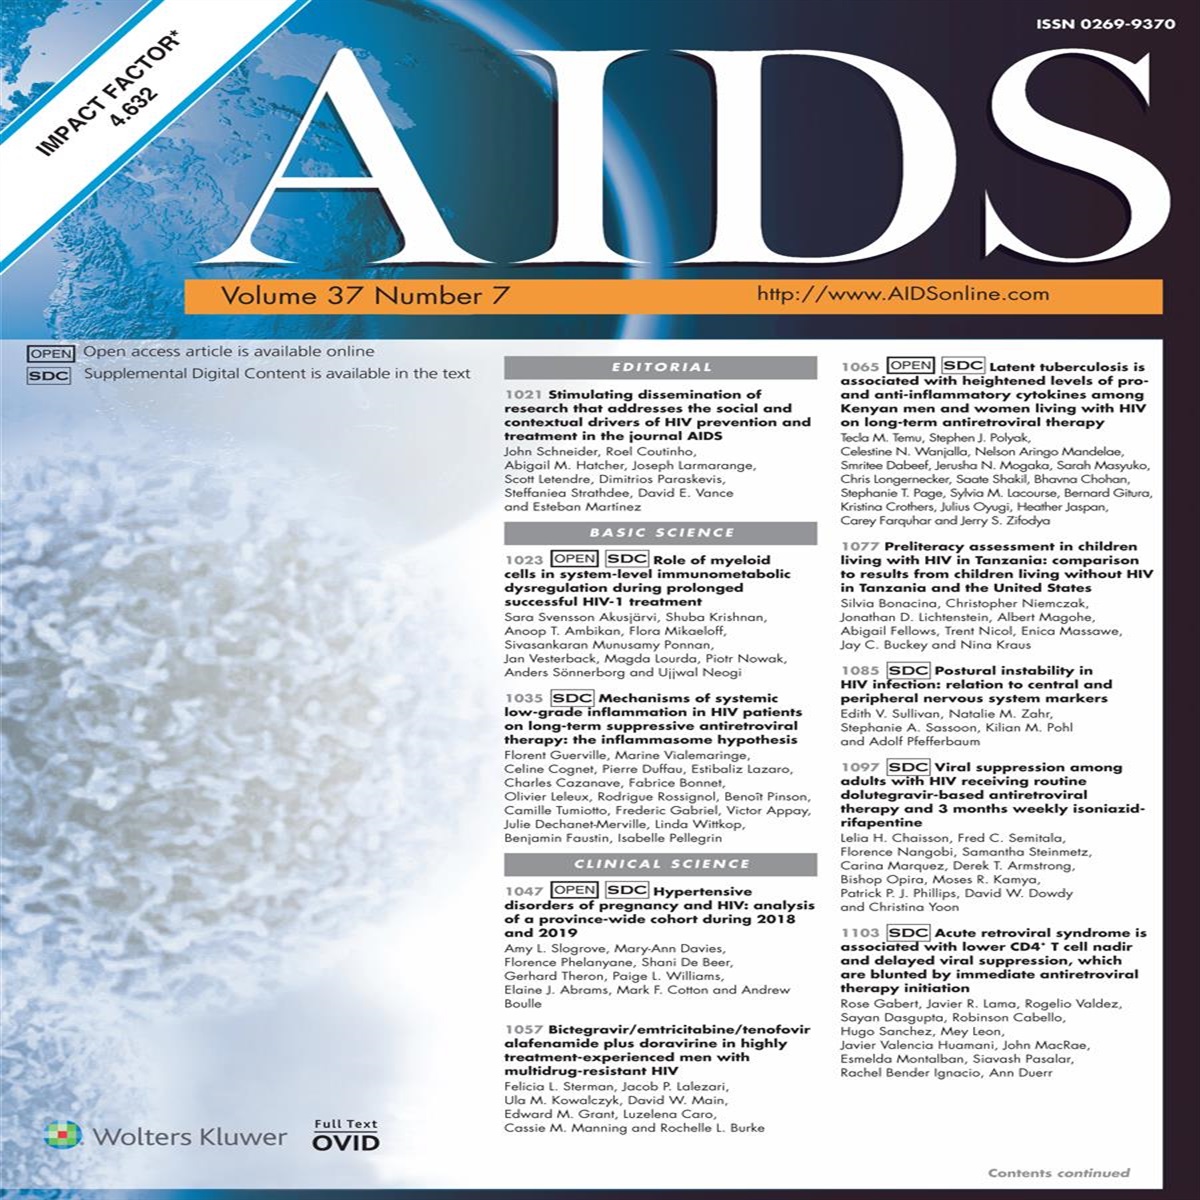 Stimulating dissemination of research that addresses the social and contextual drivers of HIV prevention and treatment in the journal AIDS